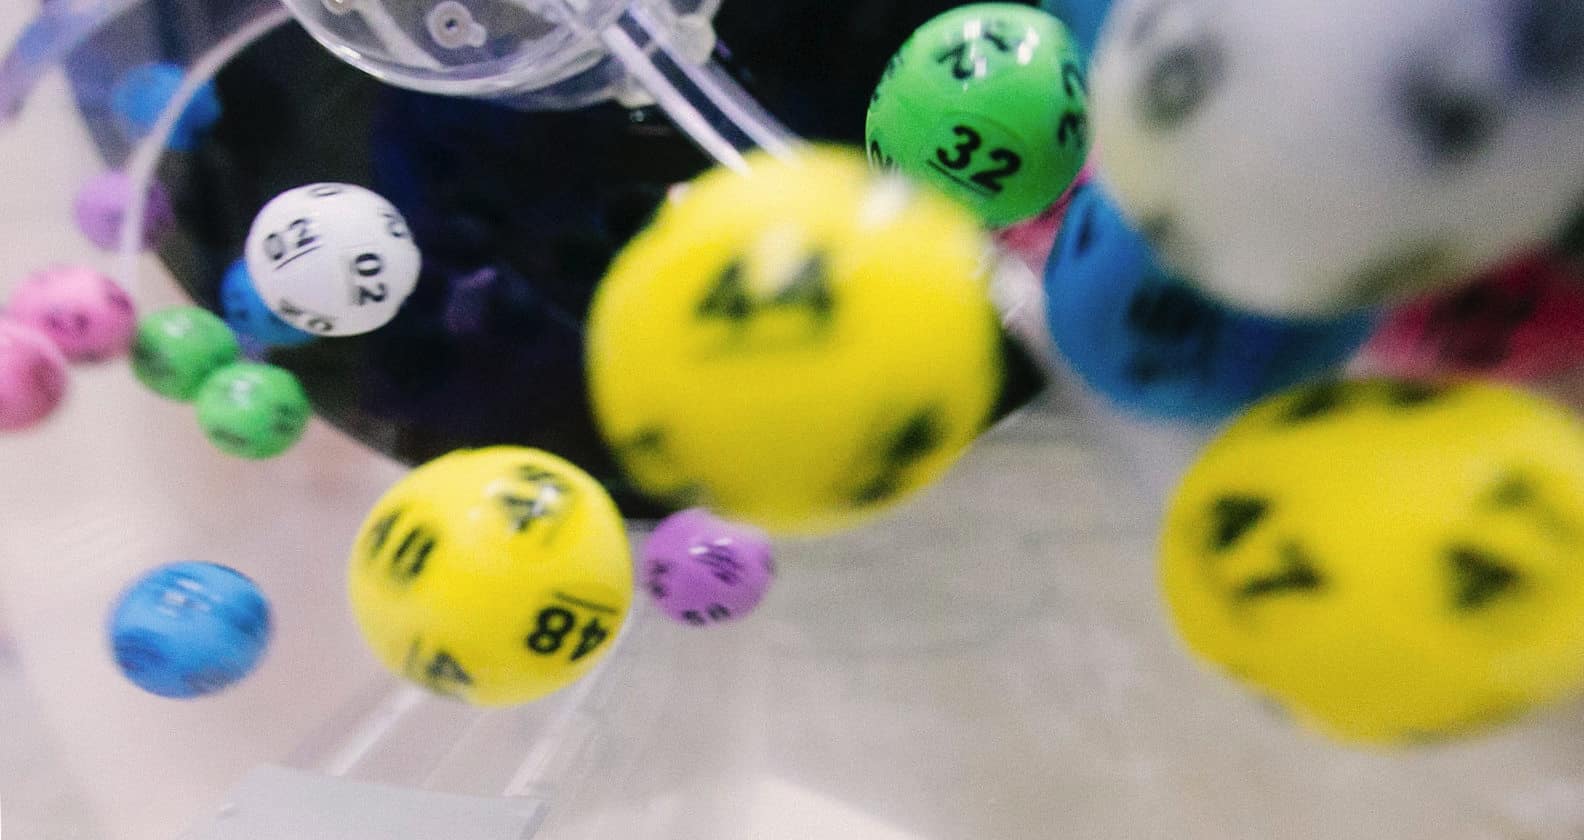 Lottery games explained